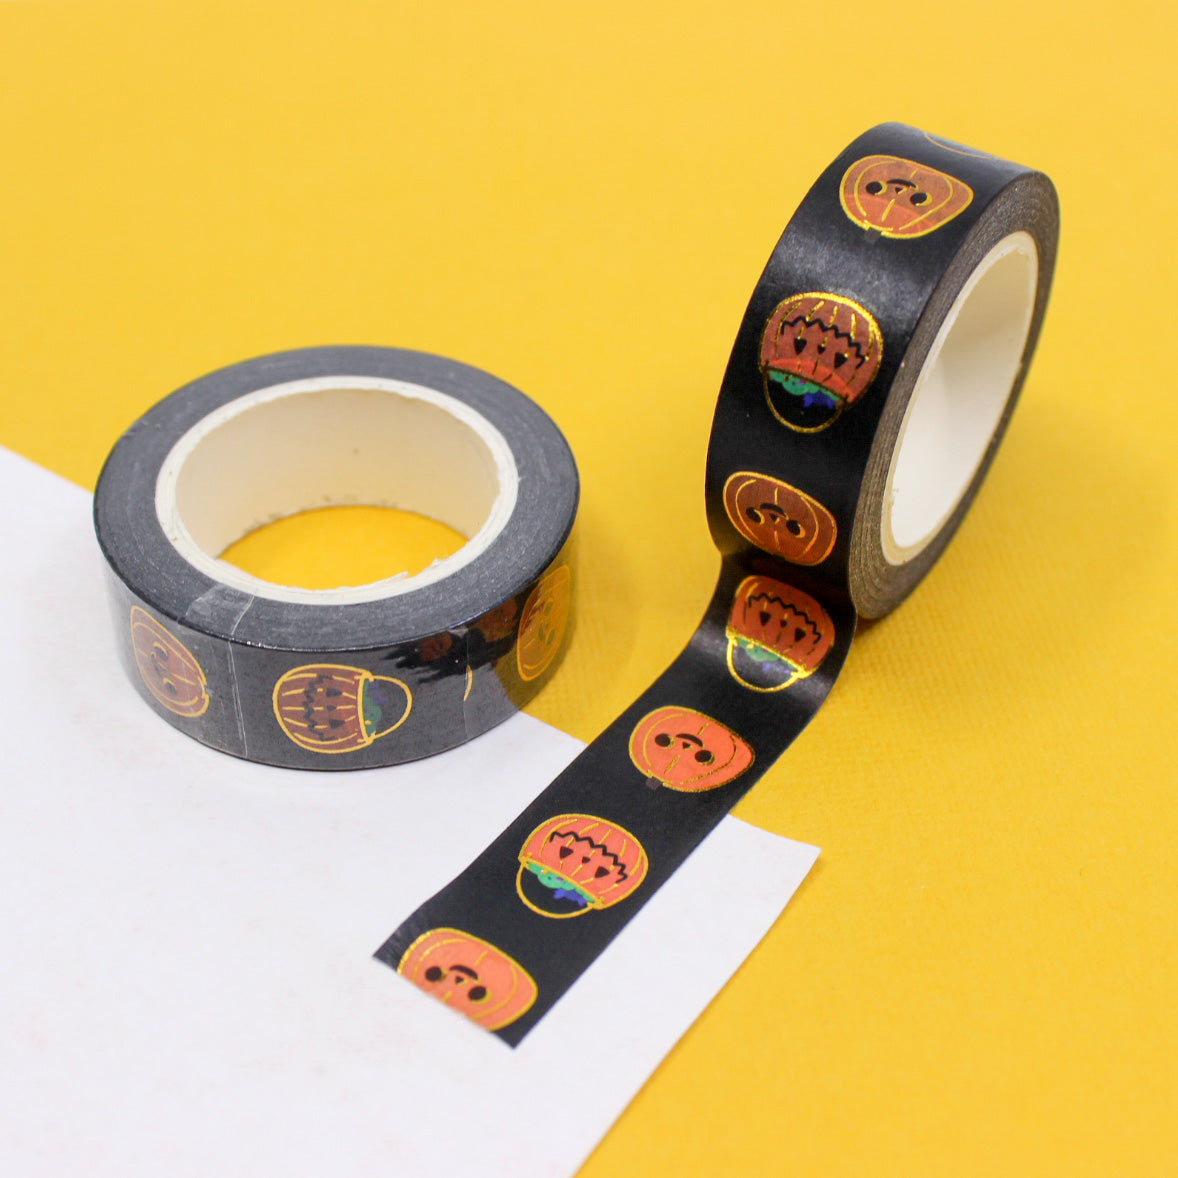 Get into the Halloween spirit with our Halloween Pumpkin Jack-o'-lantern Washi Tape, adorned with cheerful and spooky jack-o'-lantern designs. Ideal for adding a festive and traditional touch to your projects. This tape is sold at BBB Supplies Craft Shop.